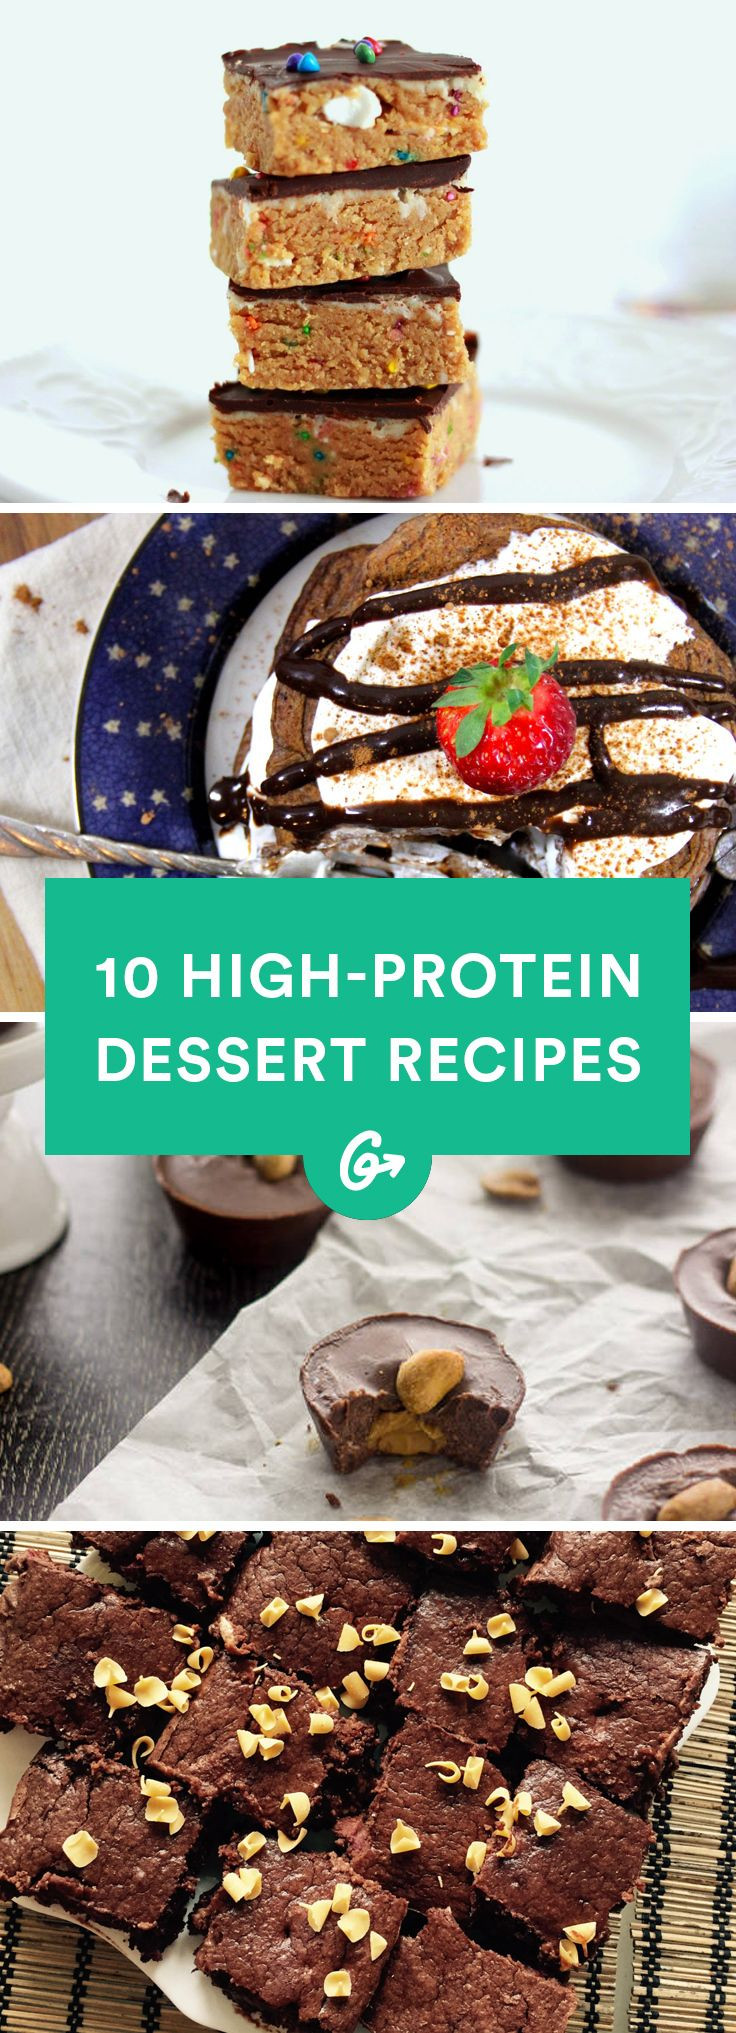 High Protein Desserts
 10 High Protein Desserts You Don t Have to Save for a